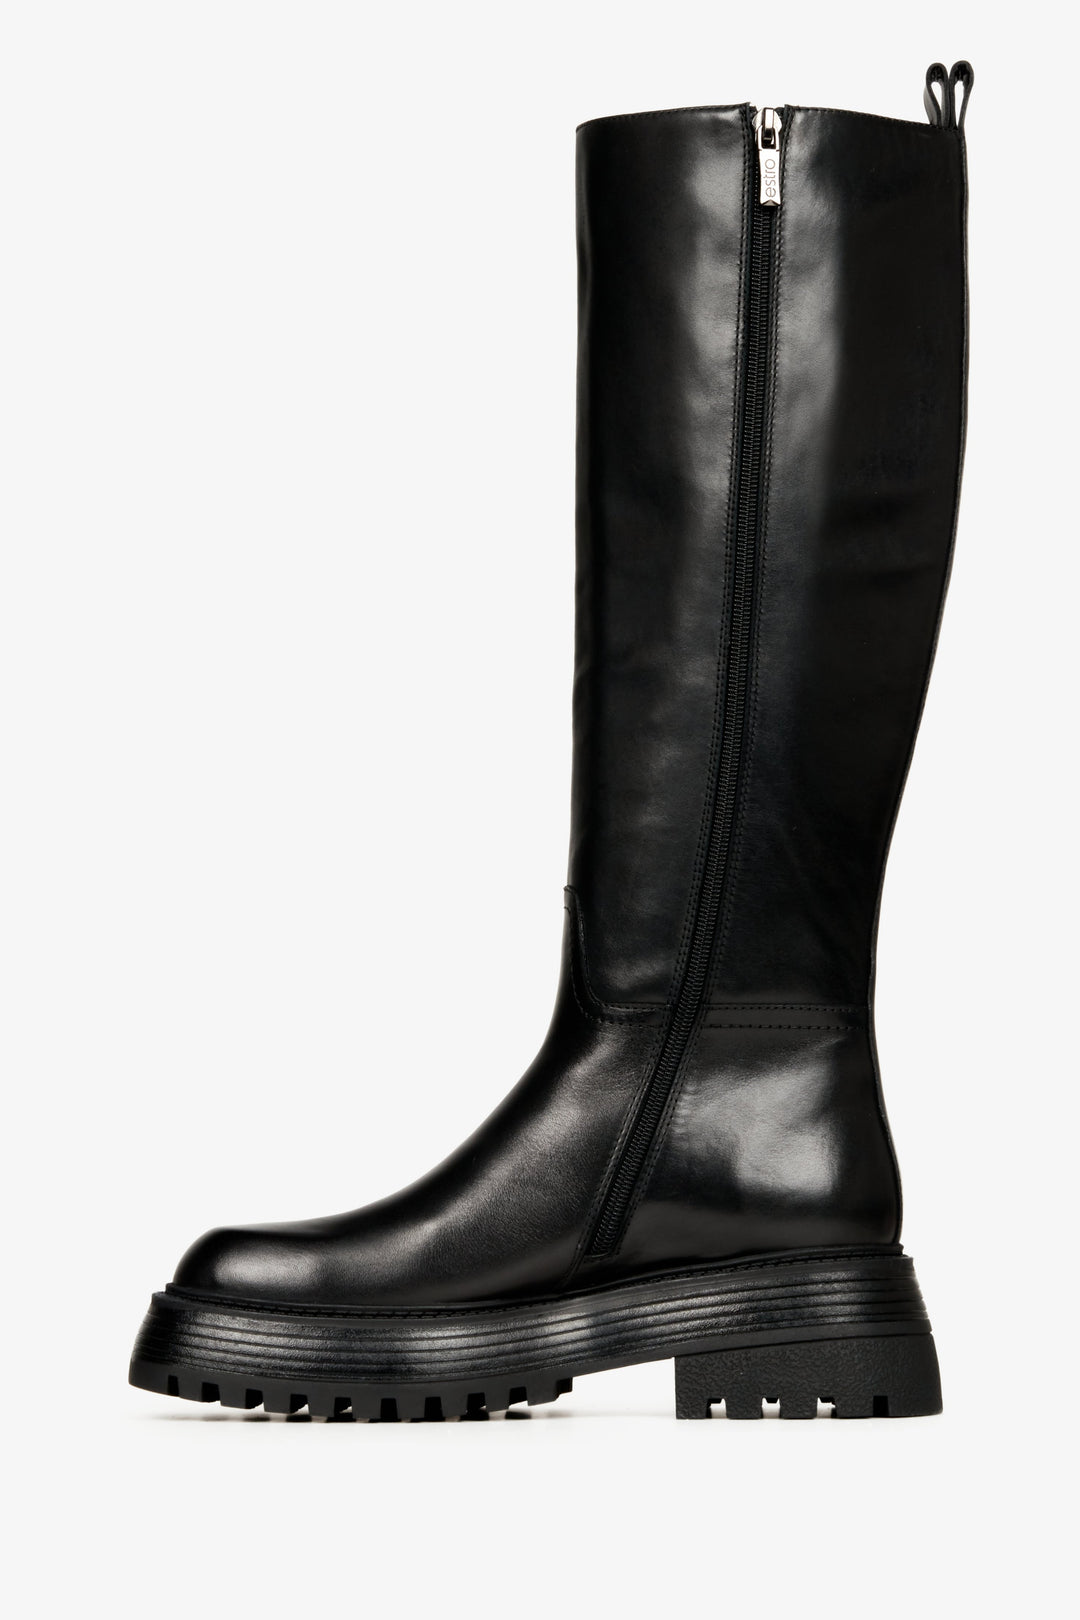 Women's tall, black spring boots made of genuine leather by Estro - shoe profile.